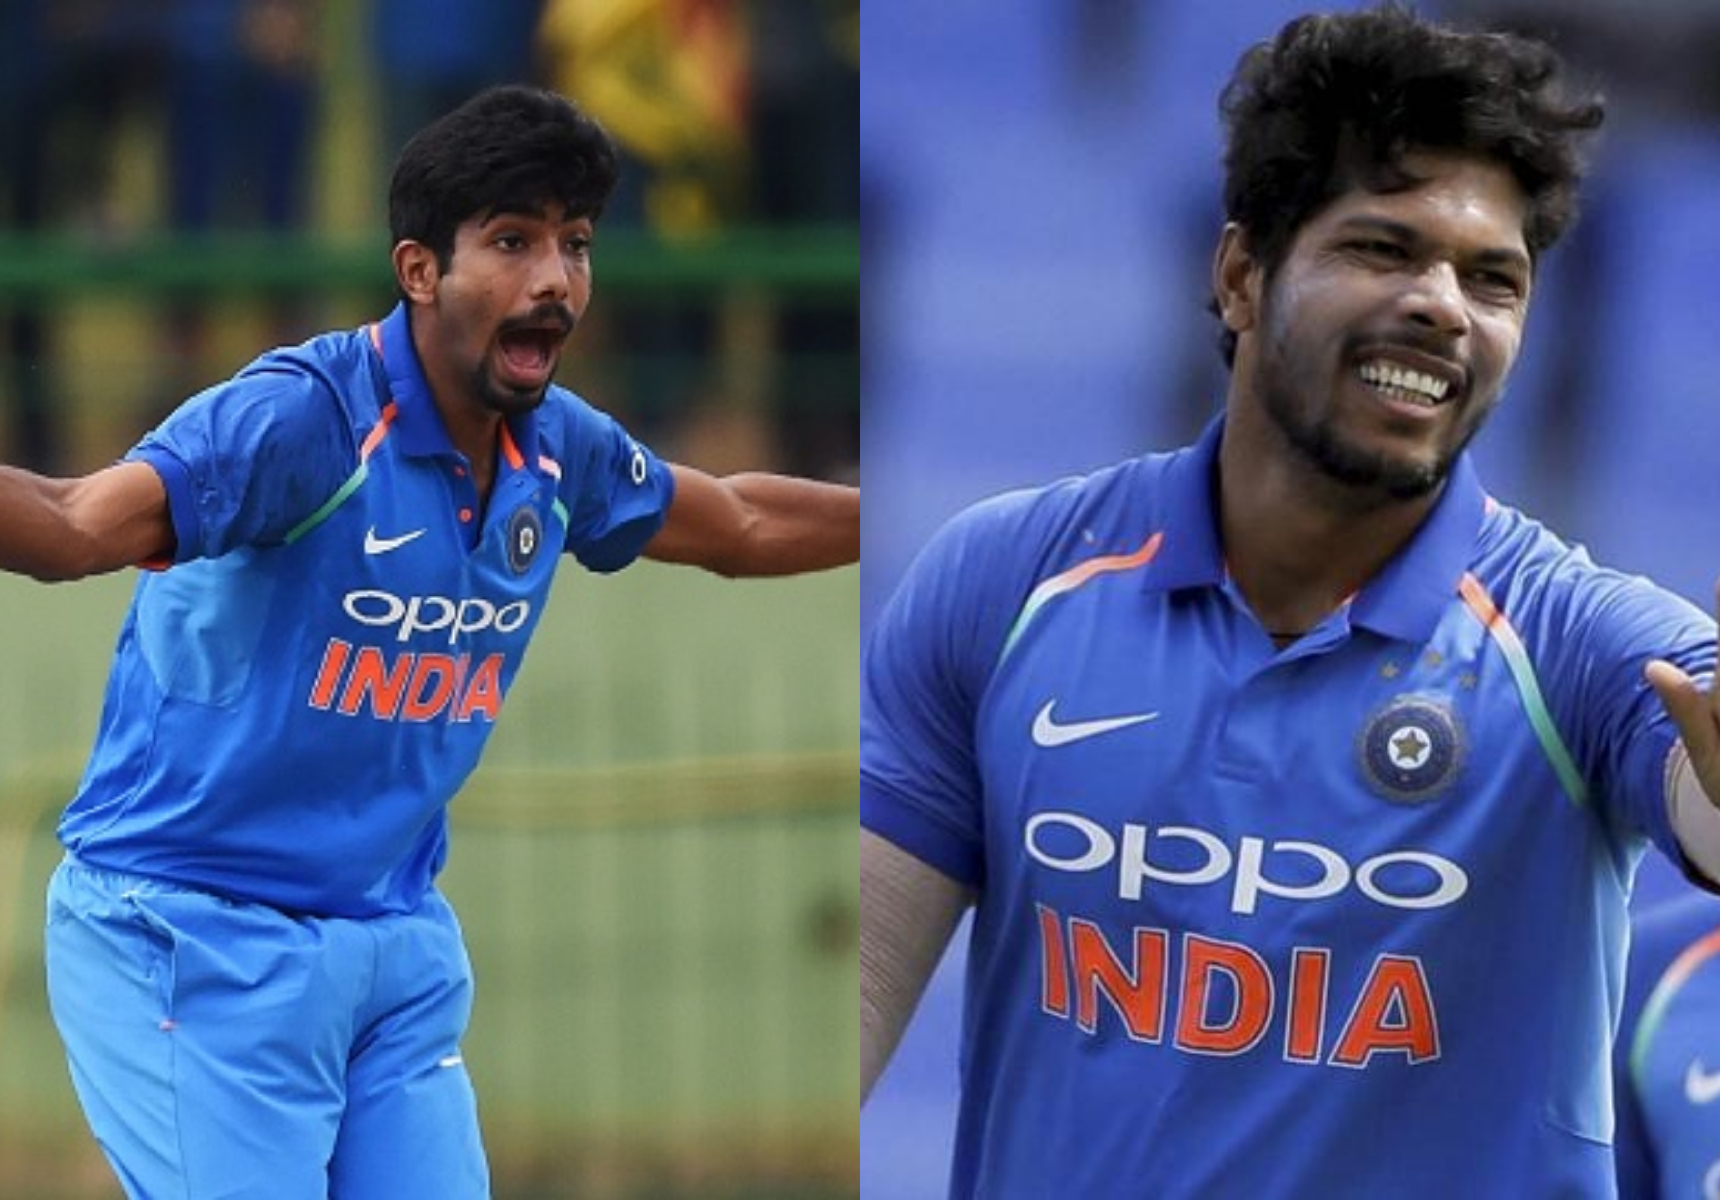 Jasprit Bumrah and Umesh Yadav might be the choices of team management to helm the fast bowling attack